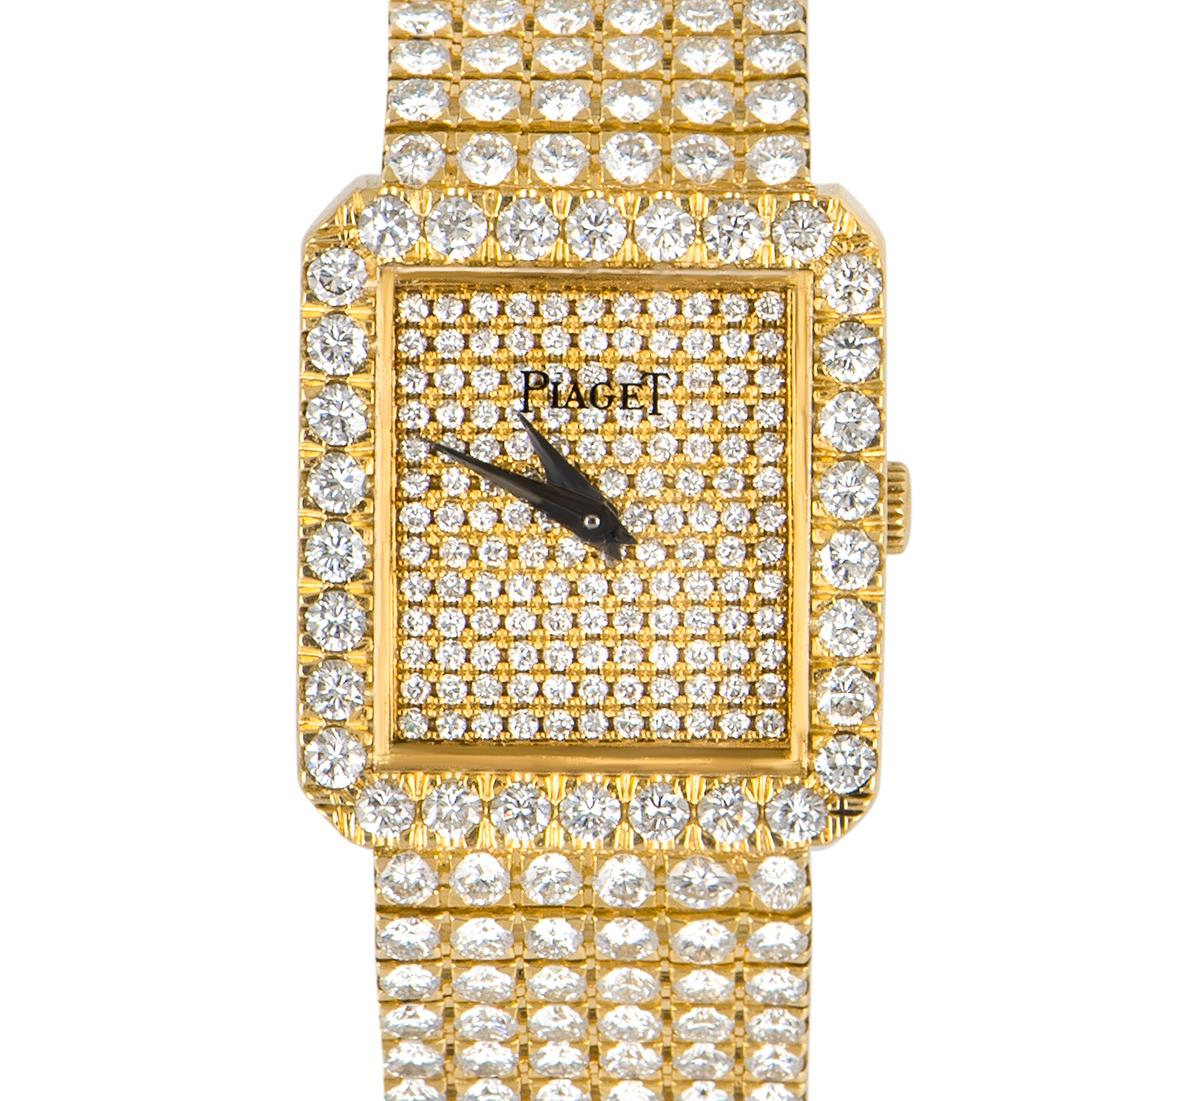 A 20 mm 18kYellowGold Fully Loaded Women's Dress Wristwatch, pave diamond dial, a fixed 18k yellow gold bezel set with 30round brilliant-cut diamonds, an 18k yellow gold jewellery style bracelet set with approximately 316 round brilliant cut